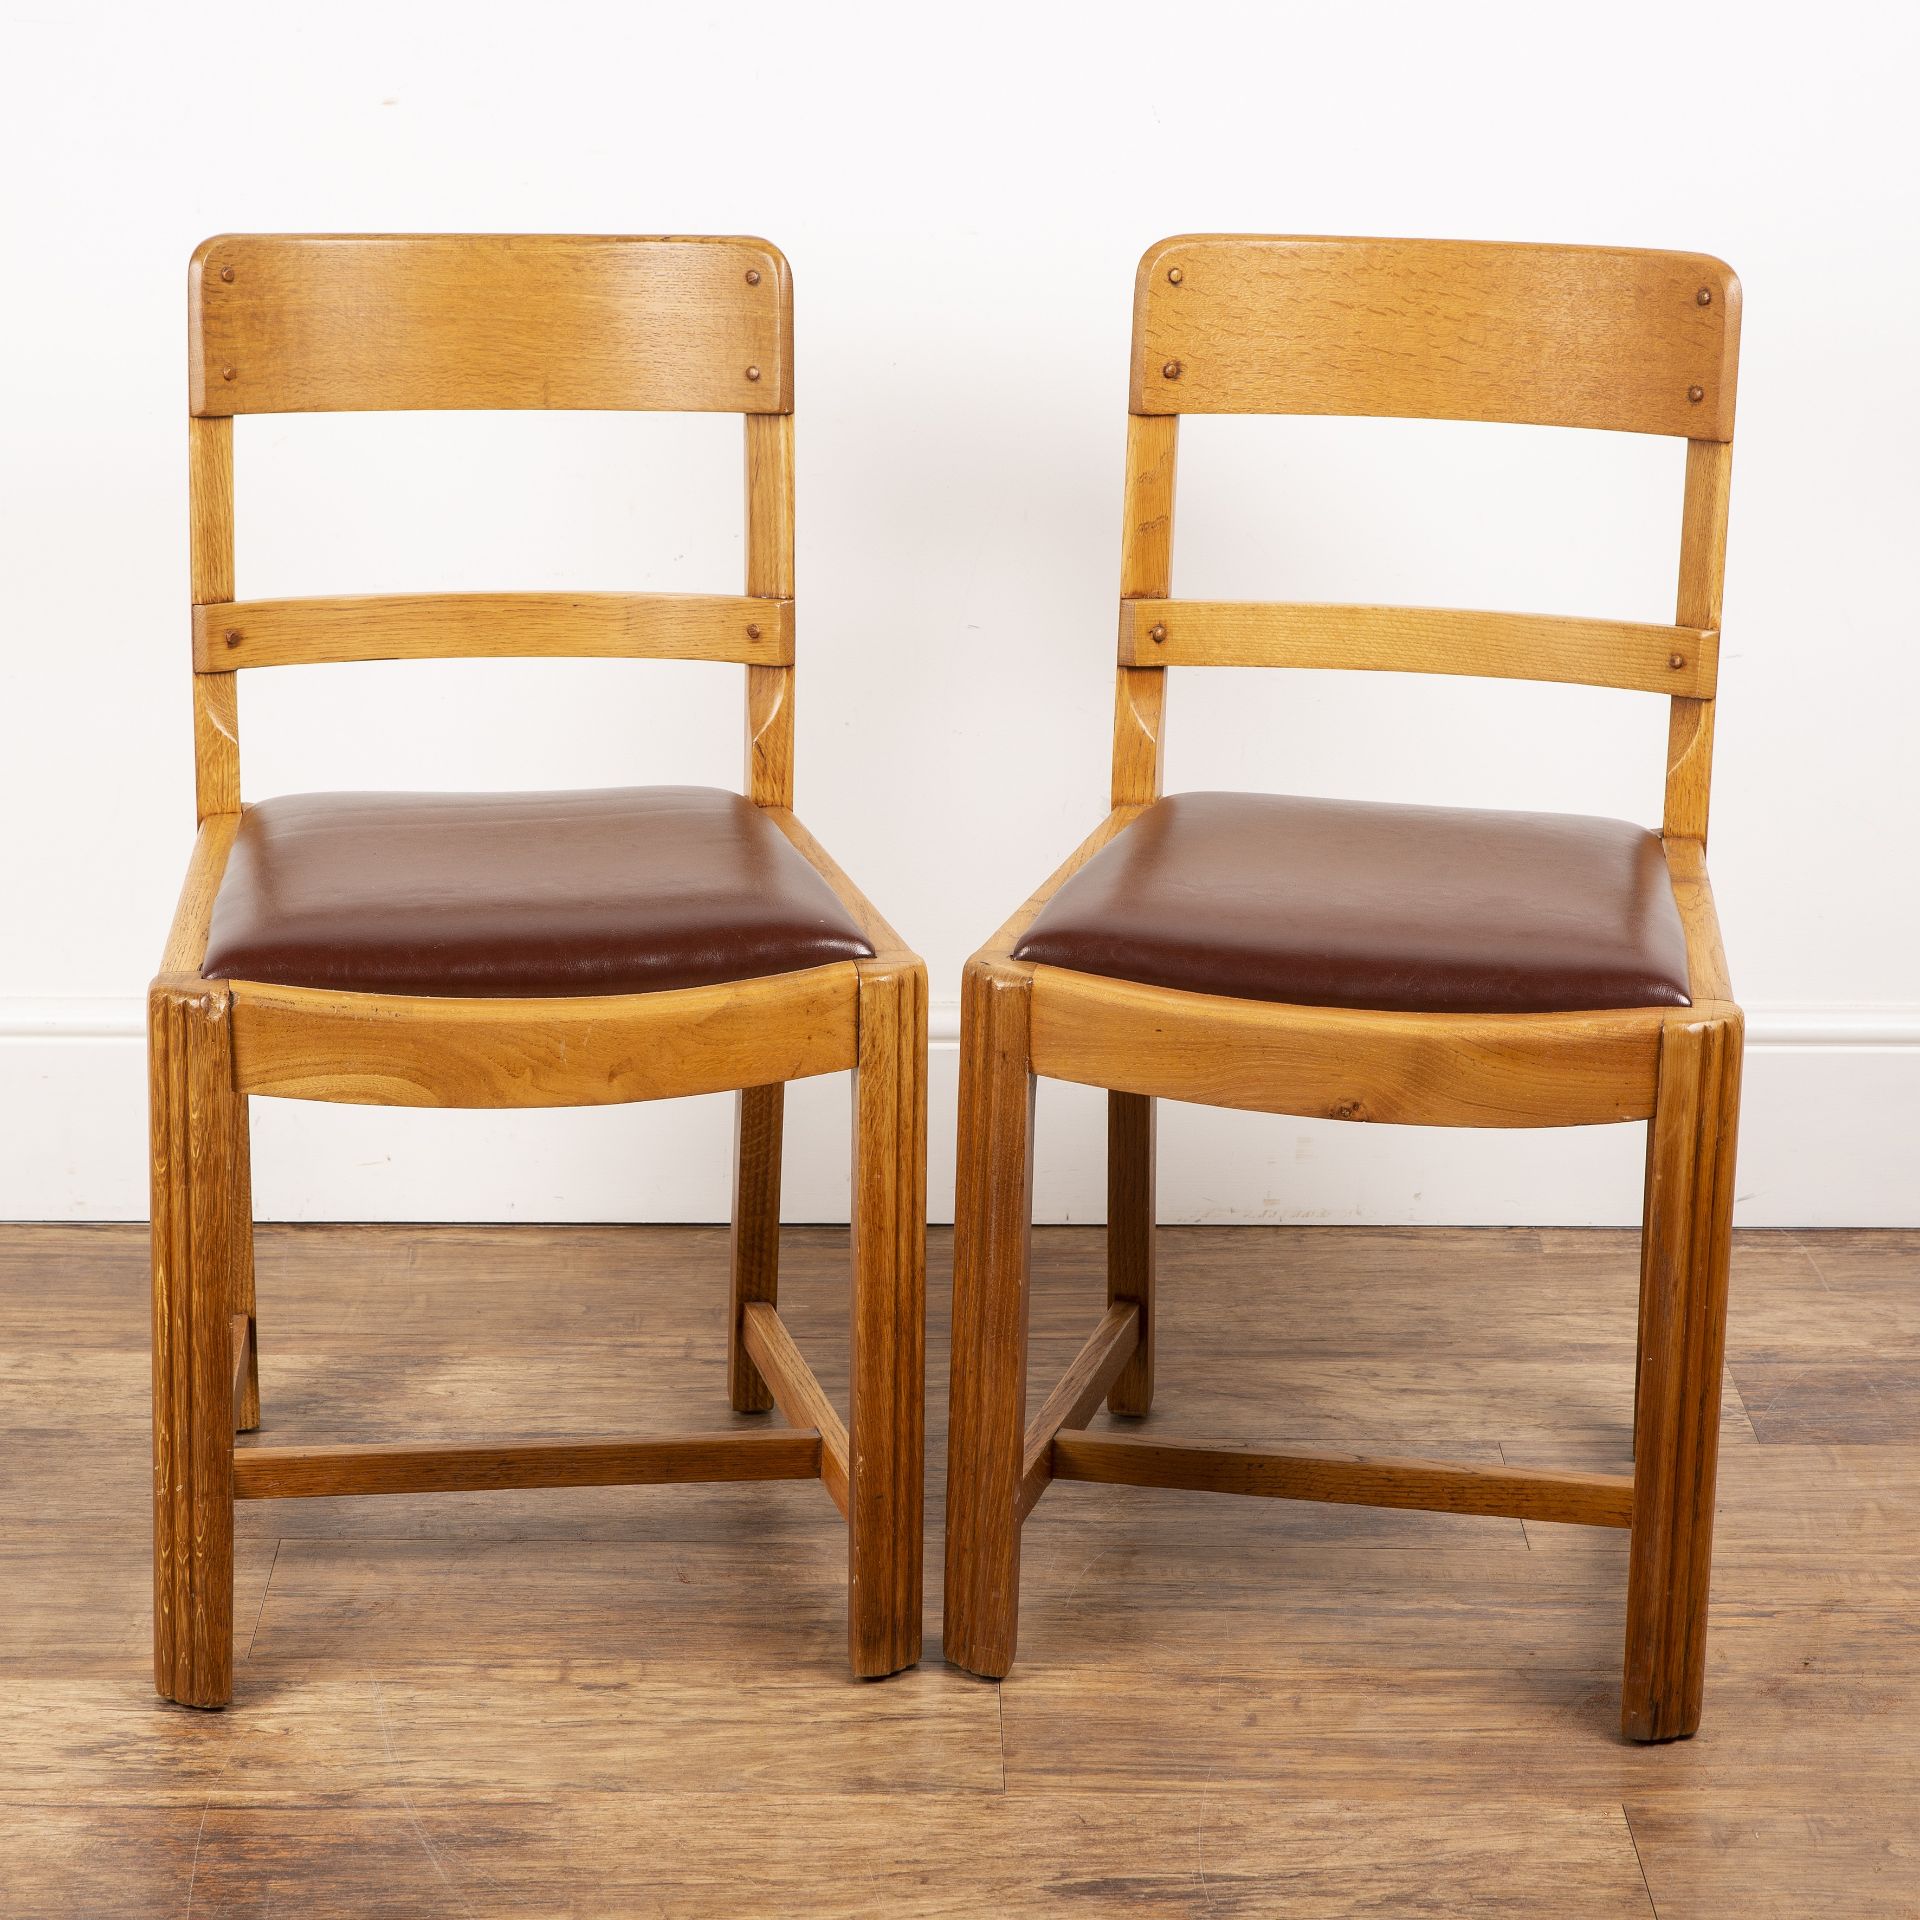 Attributed to Heals pair of oak-framed chairs with bar backs, reupholstered red seats, with stylised